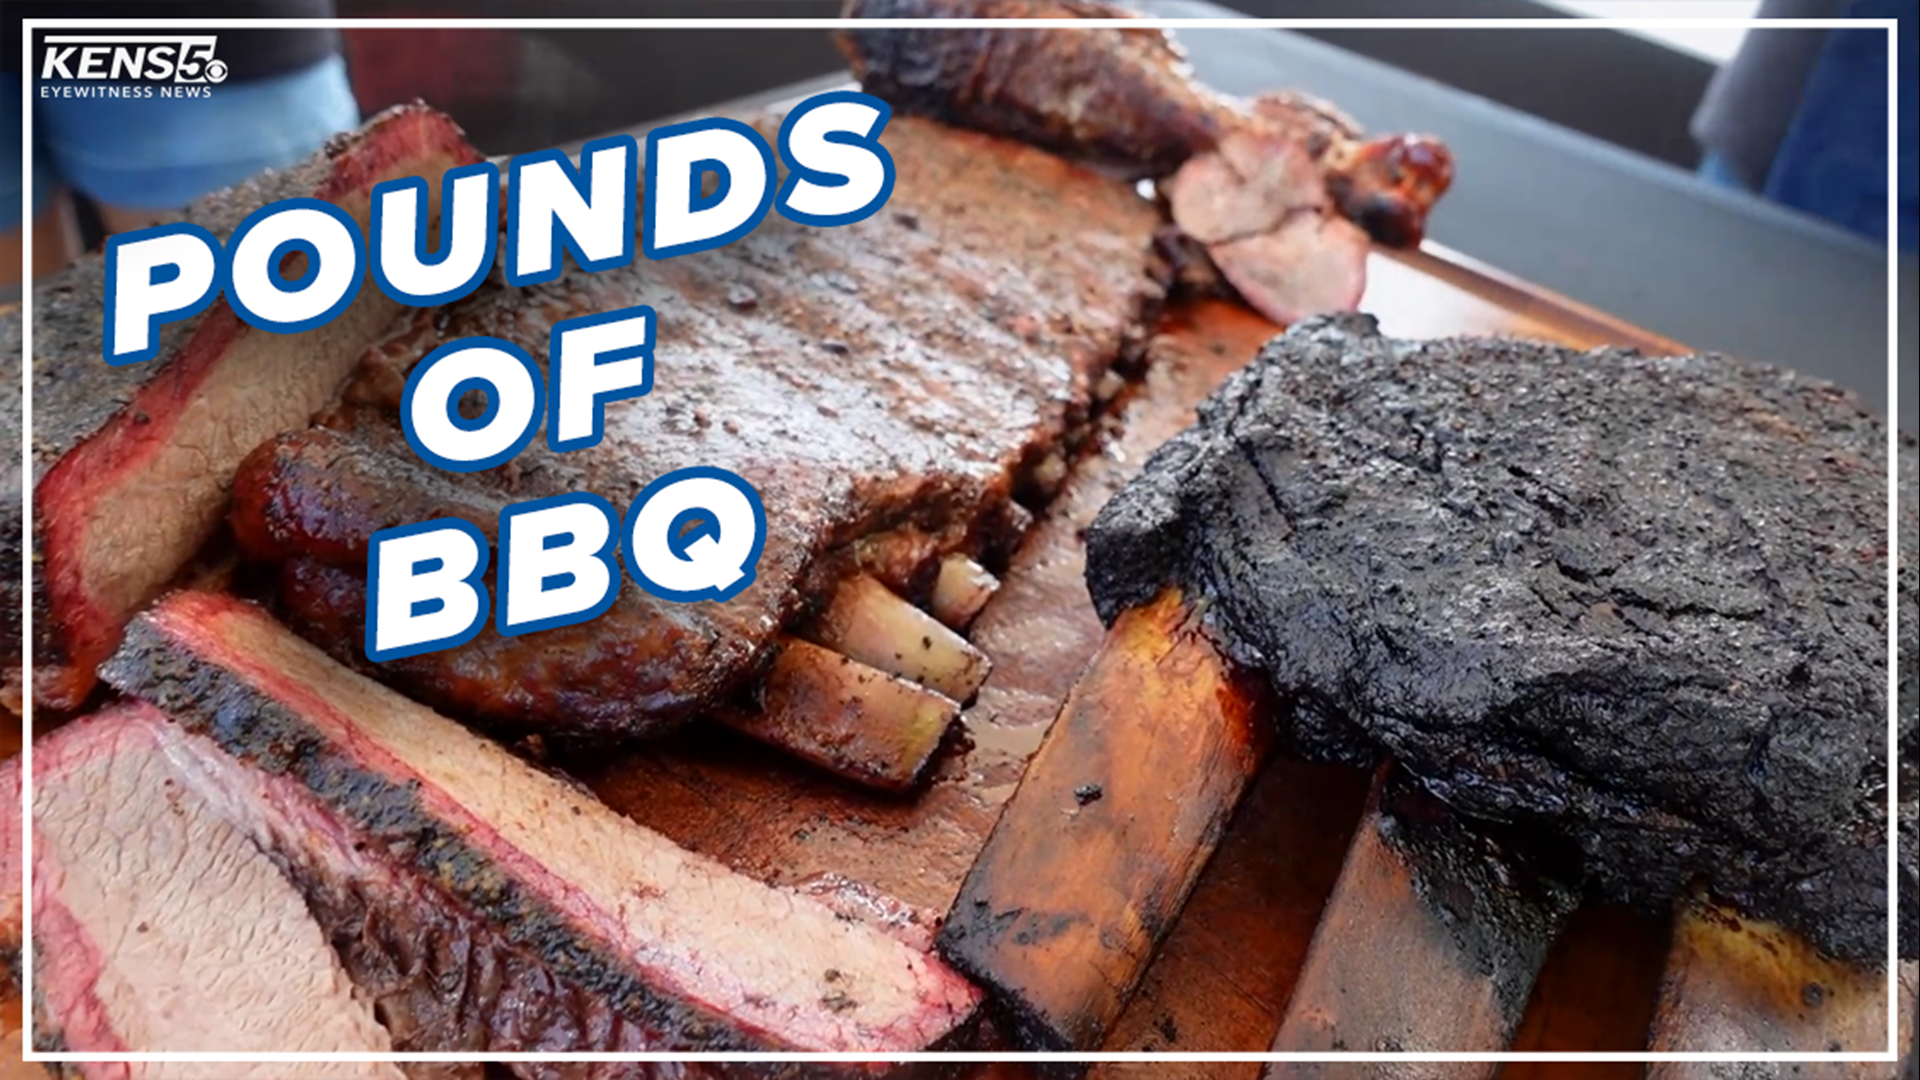 When you slice the brisket to find it’s oh so juicy, you’ve stumbled upon true Texas BBQ. Lexi Hazlett shows you Double A's BBQ.